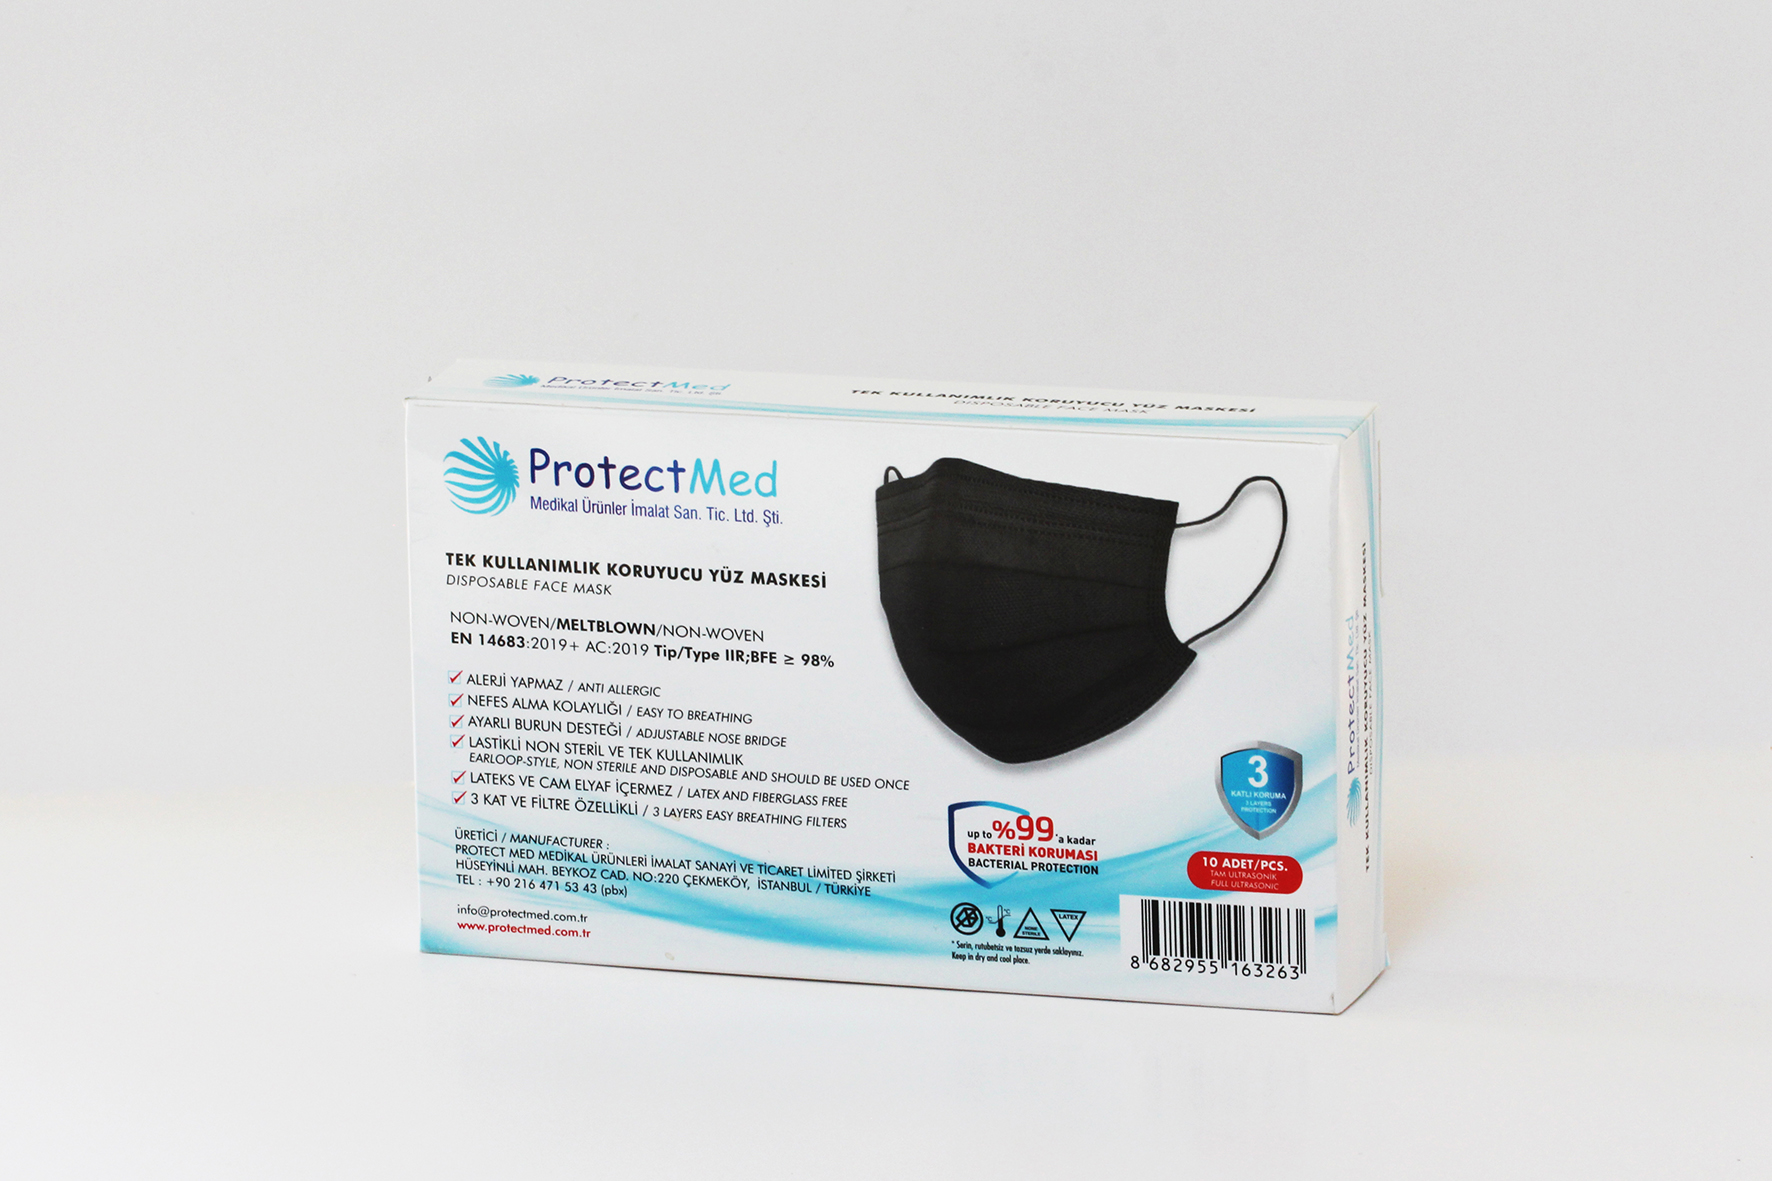 ProtectMed